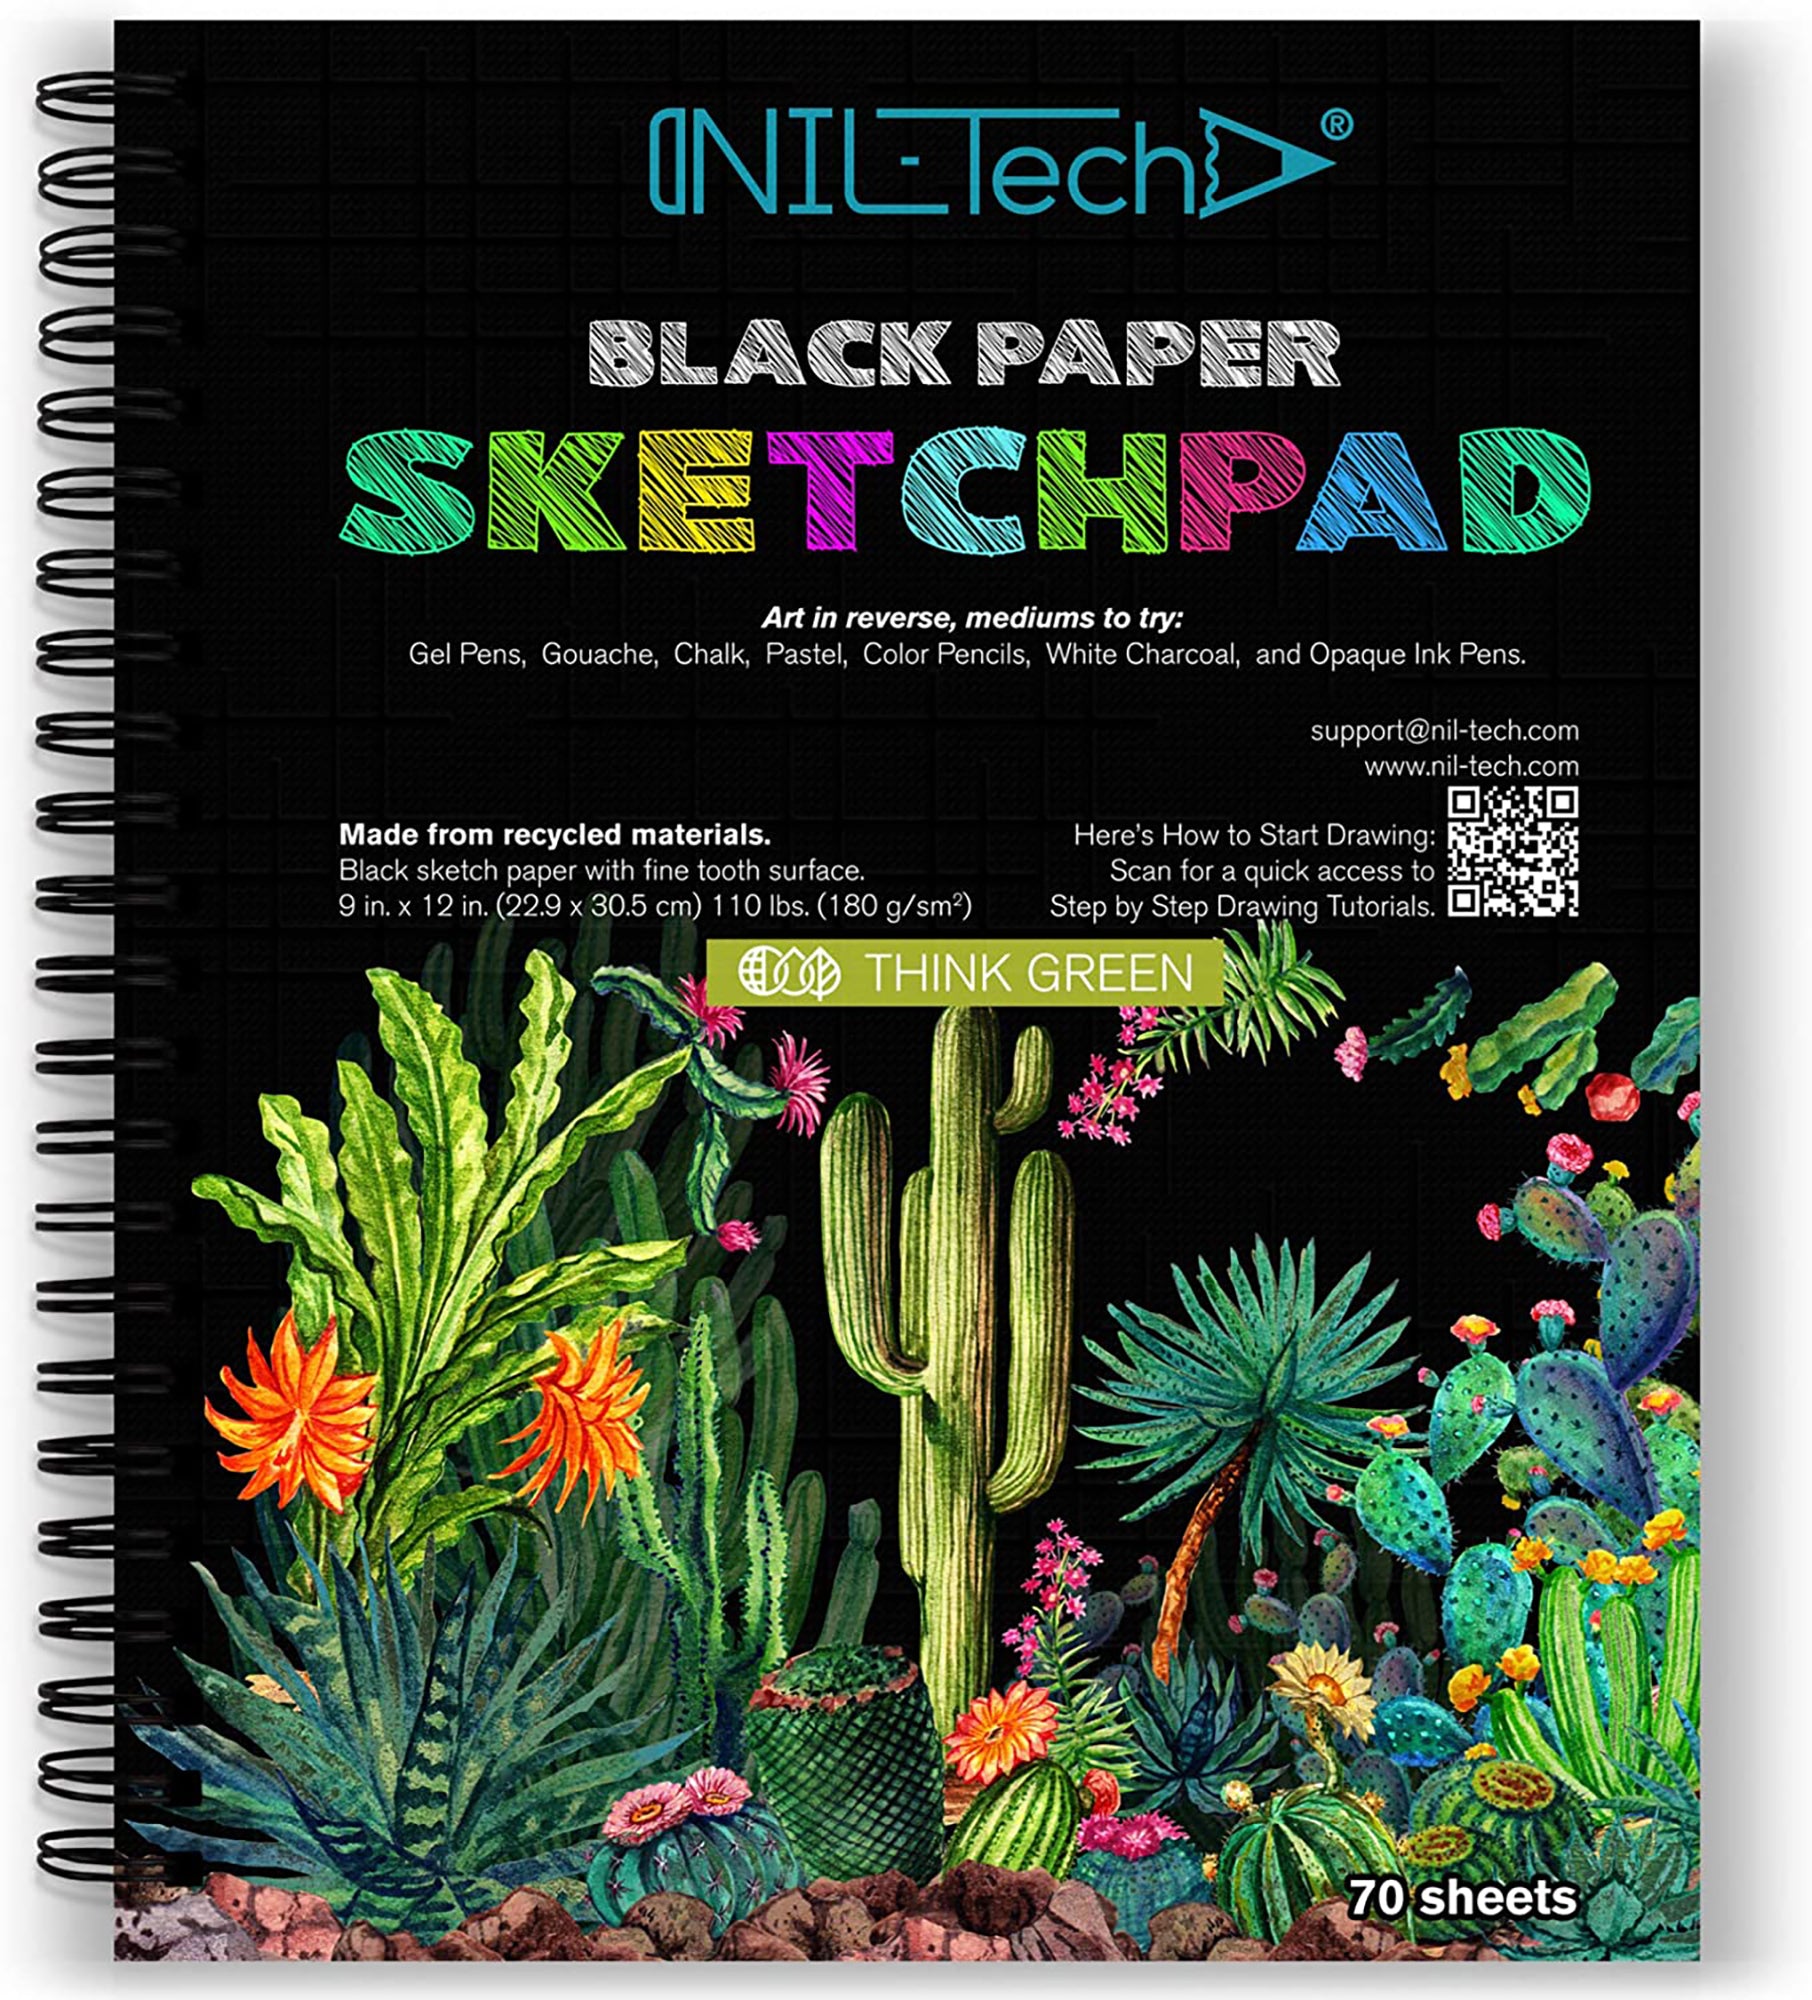 Drawing Pads and Sketch Pads